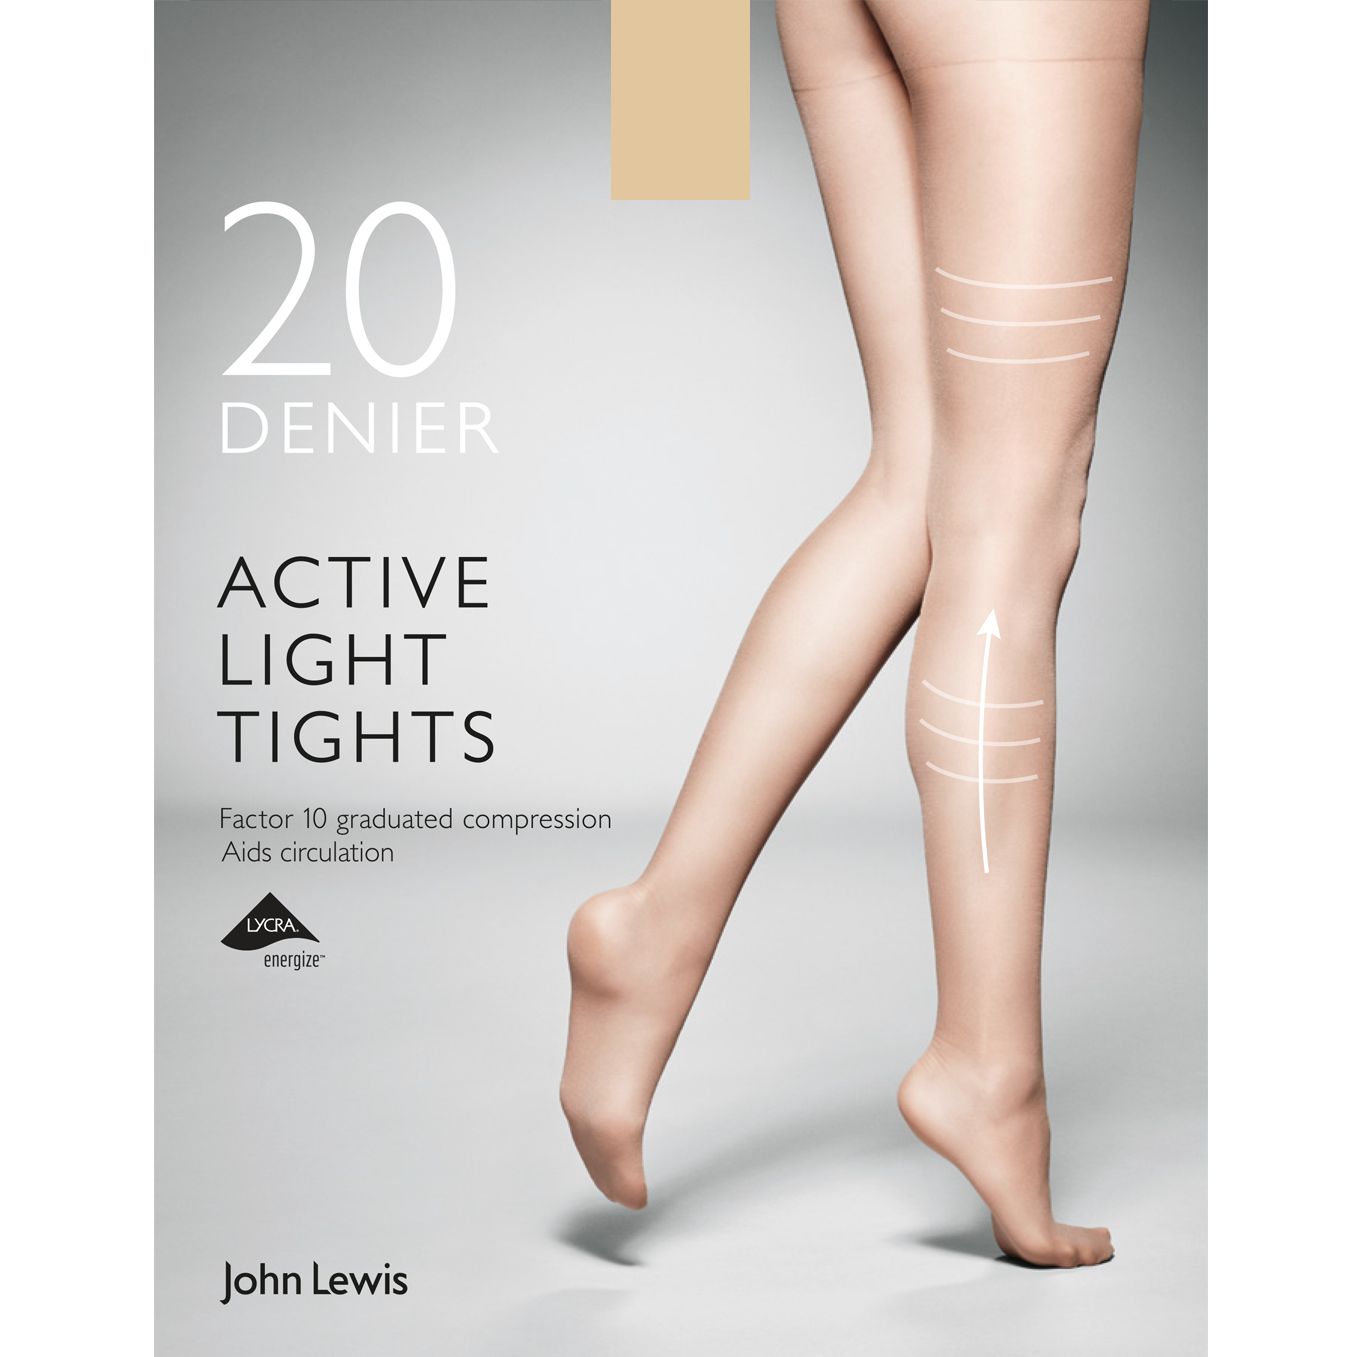 John Lewis XL 7 Denier Expresso New Natural Skintone Colour Barely There Tights